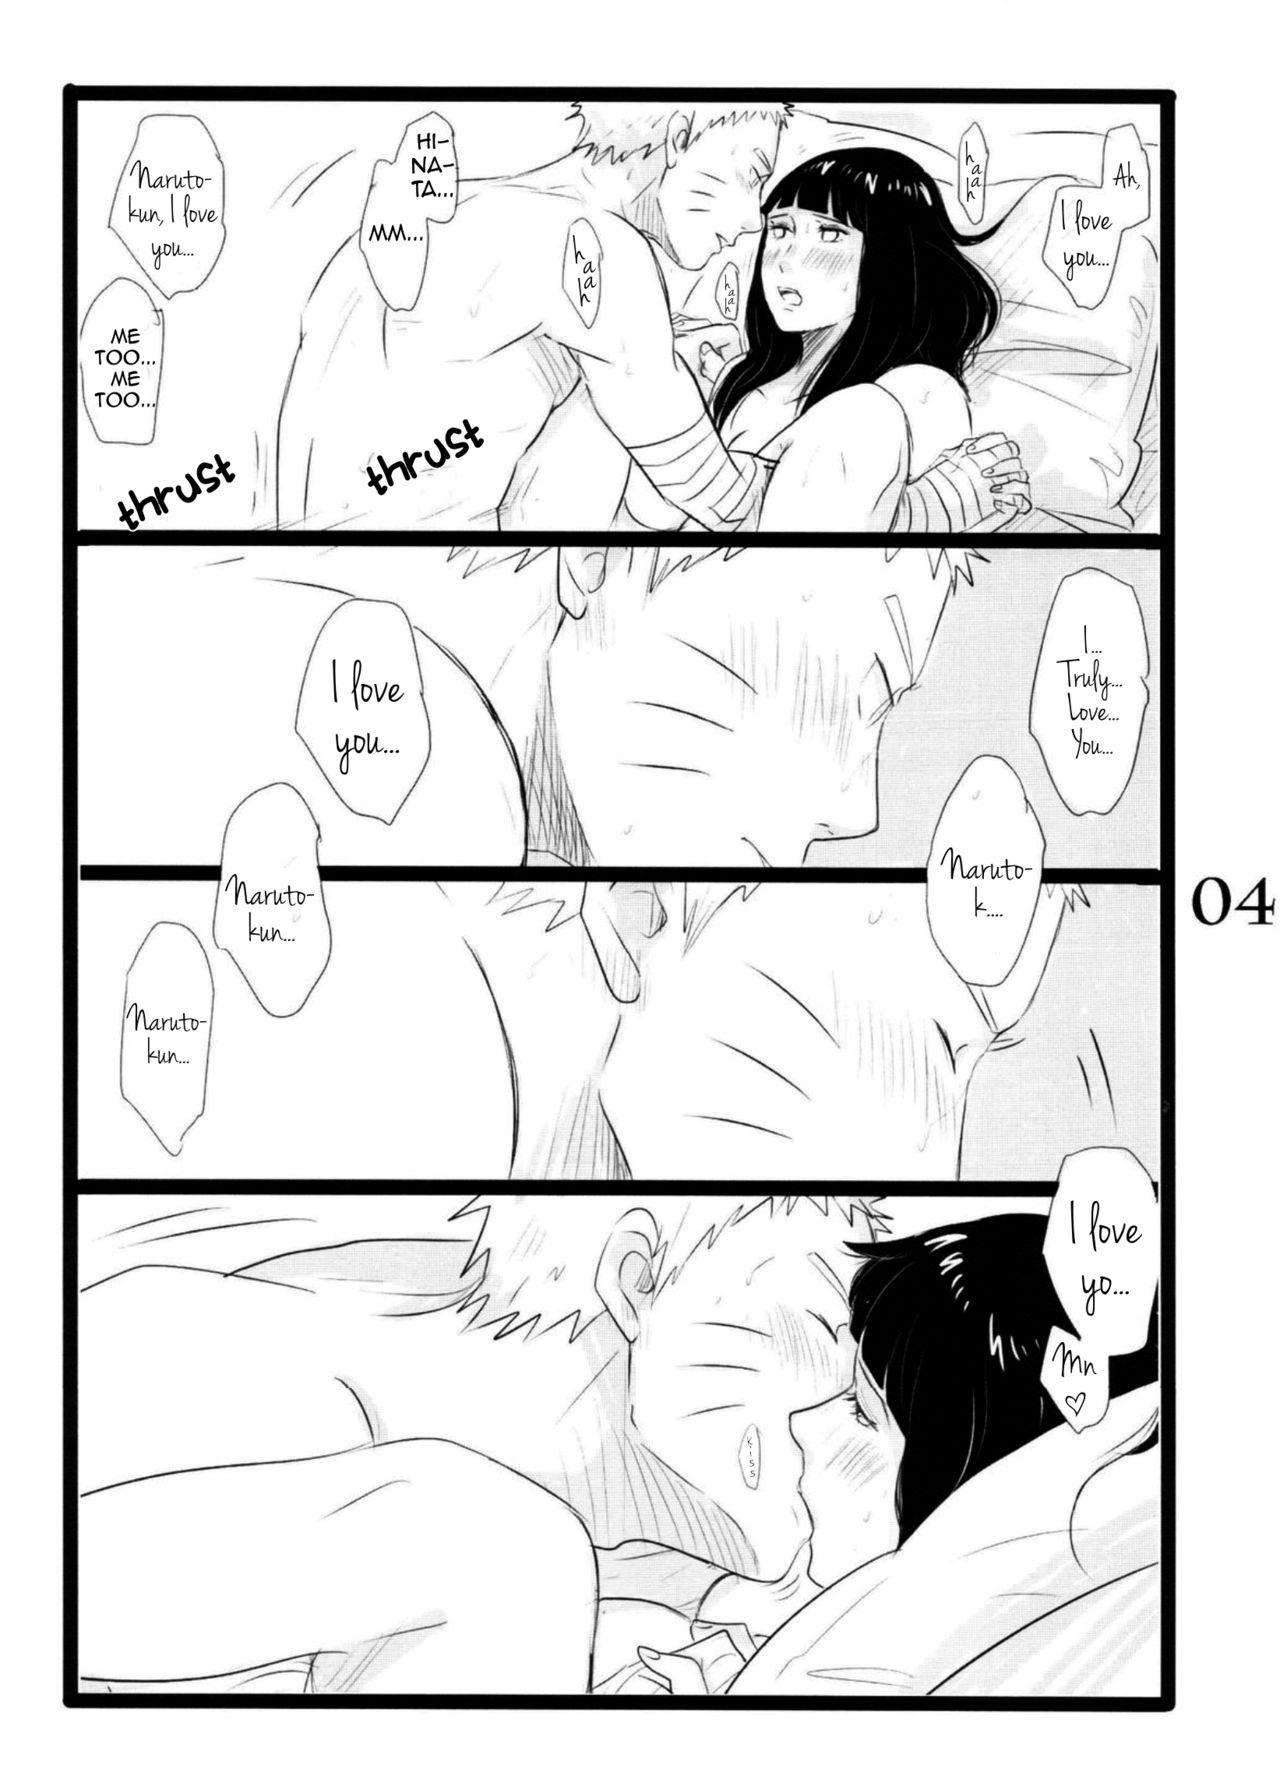 Screaming YOUR MY SWEET - I LOVE YOU DARLING - Naruto Perrito - Page 5